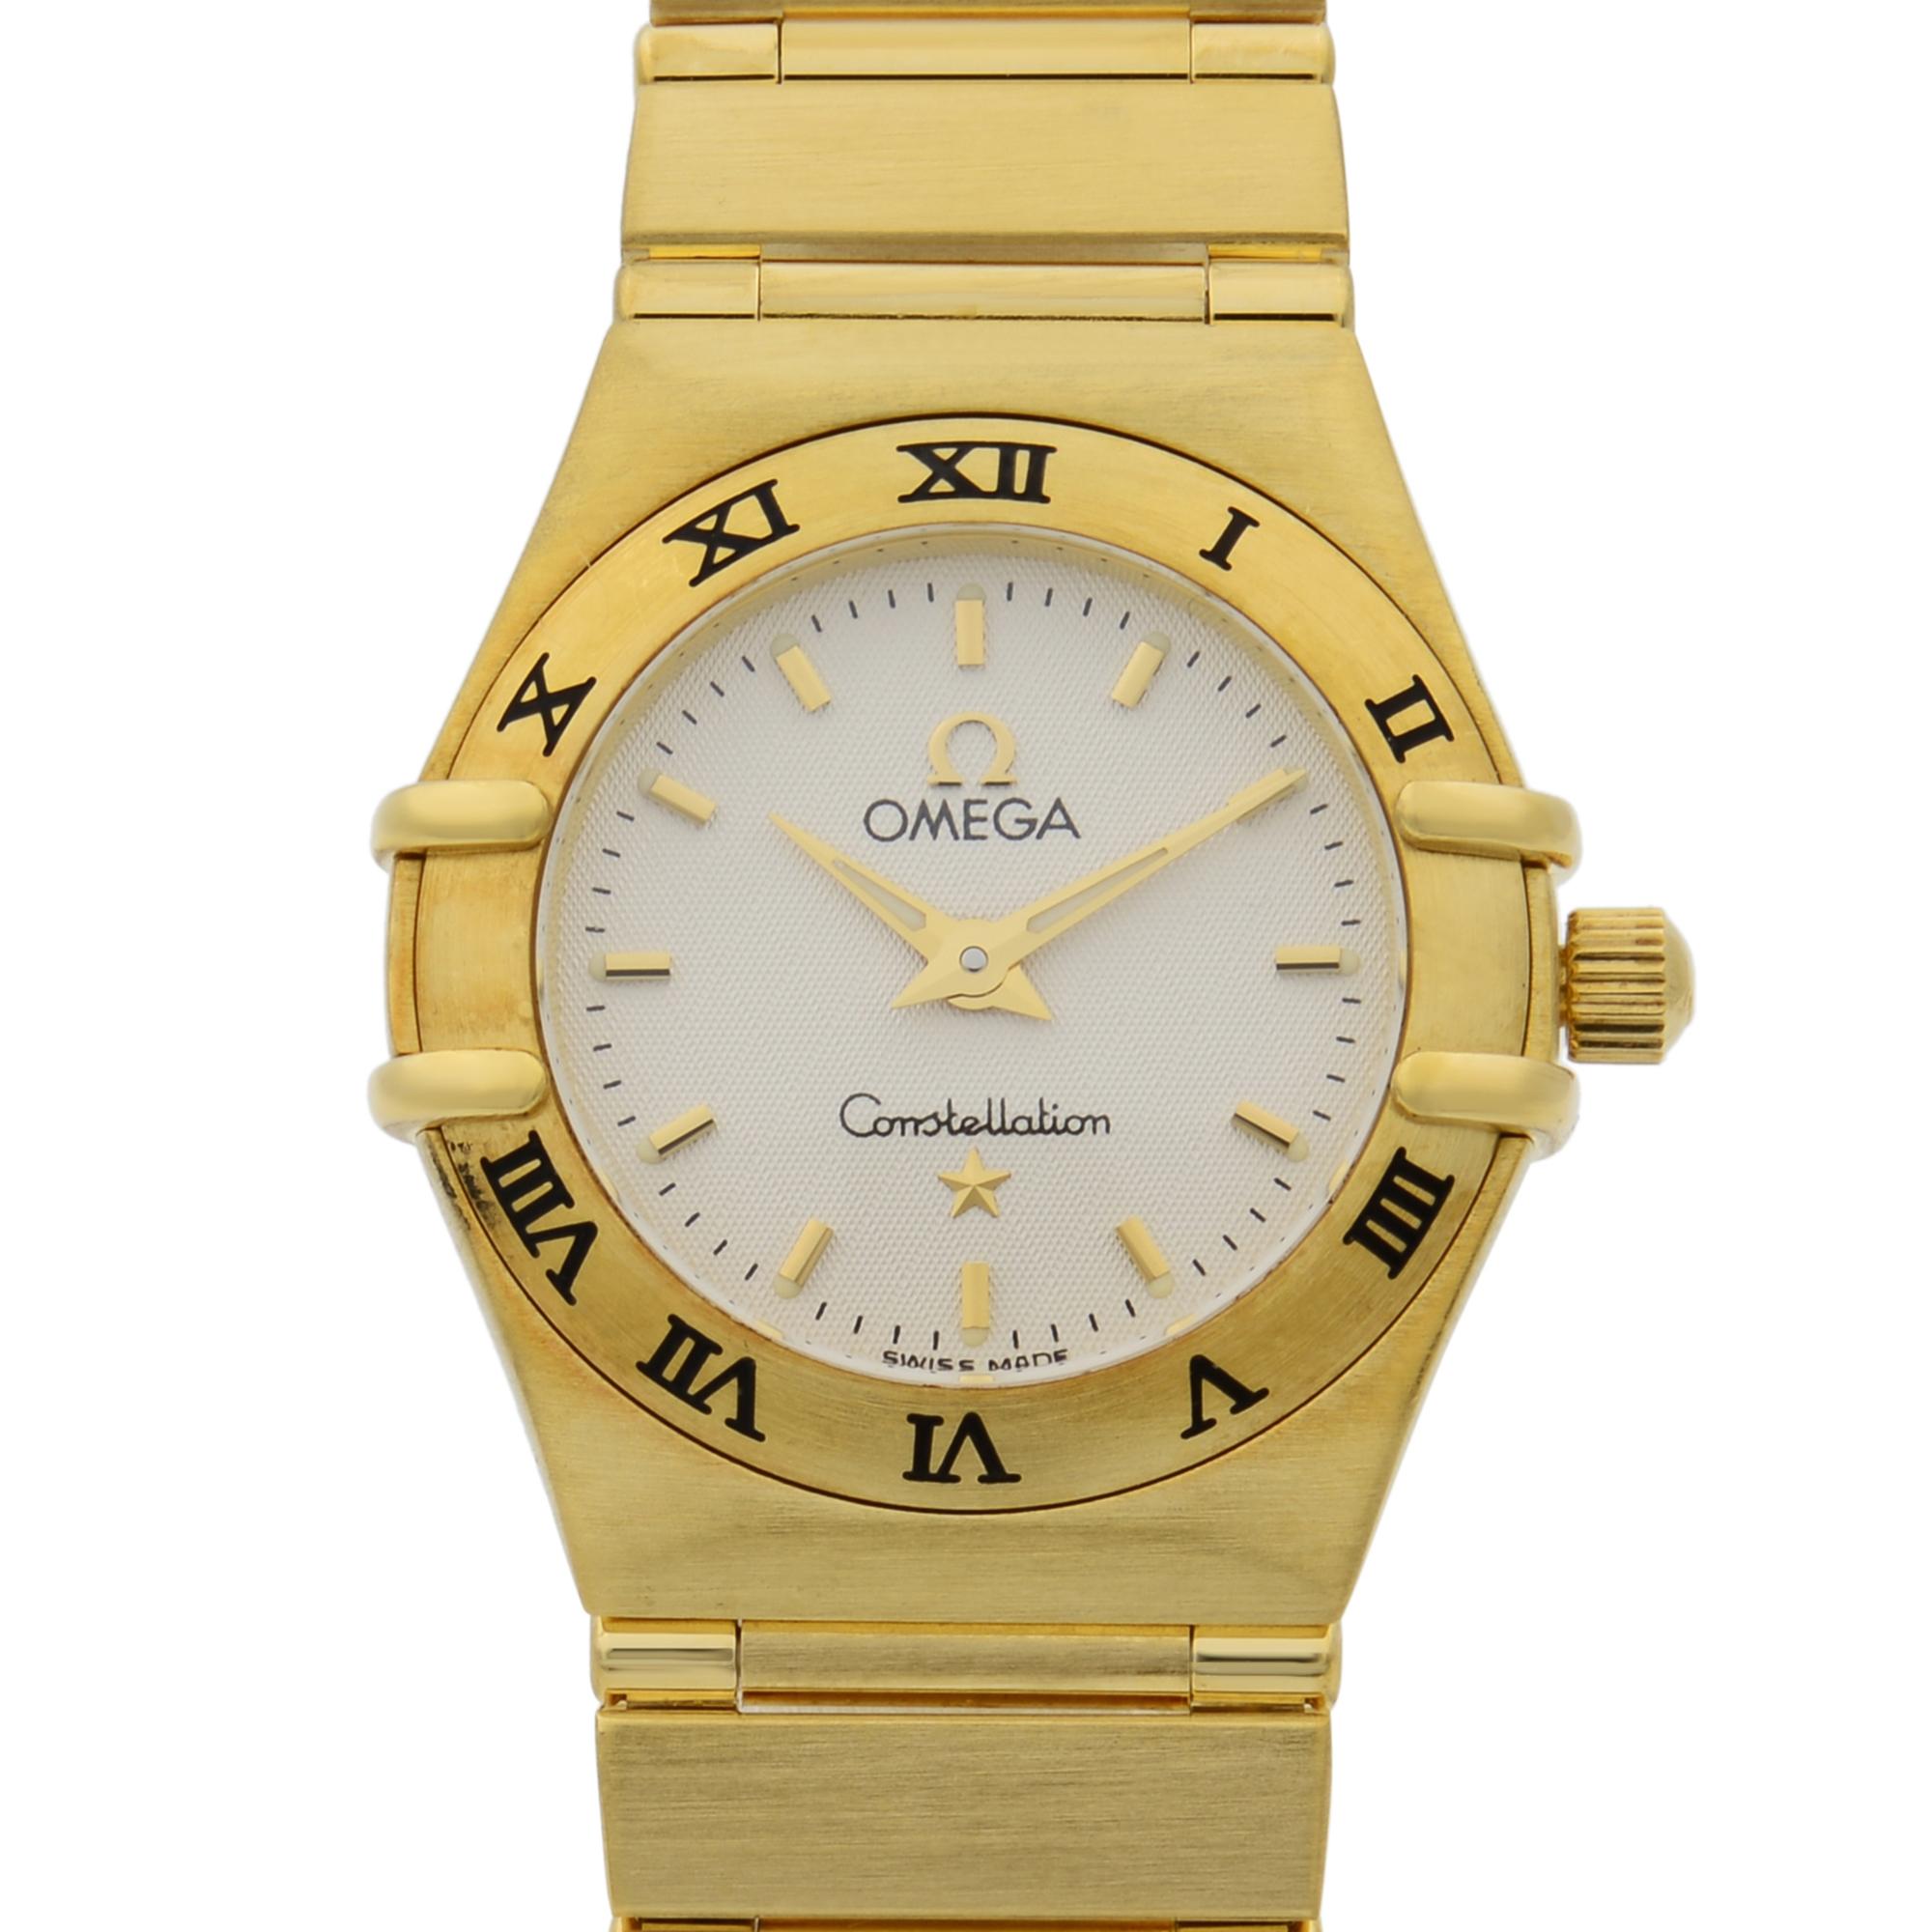 This pre-owned Omega Constellation  is a beautiful Ladie's timepiece that is powered by quartz (battery) movement which is cased in a yellow gold case. It has a round shape face, no features dial and has hand sticks style markers. It is completed